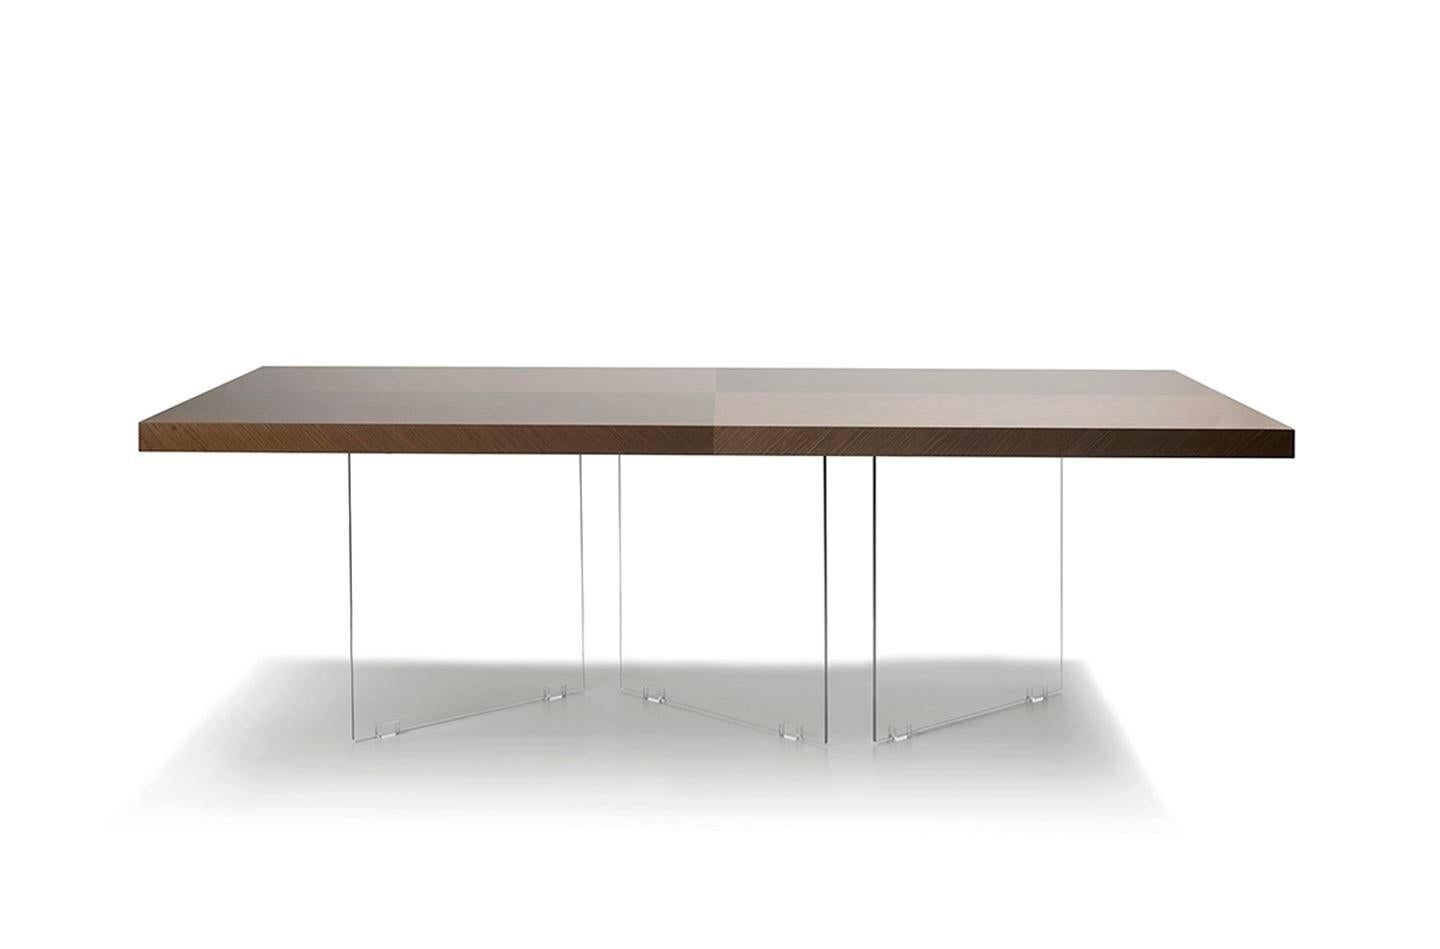 European Contemporary Dining Table Featuring Macassar Ebony Top & Glass Base